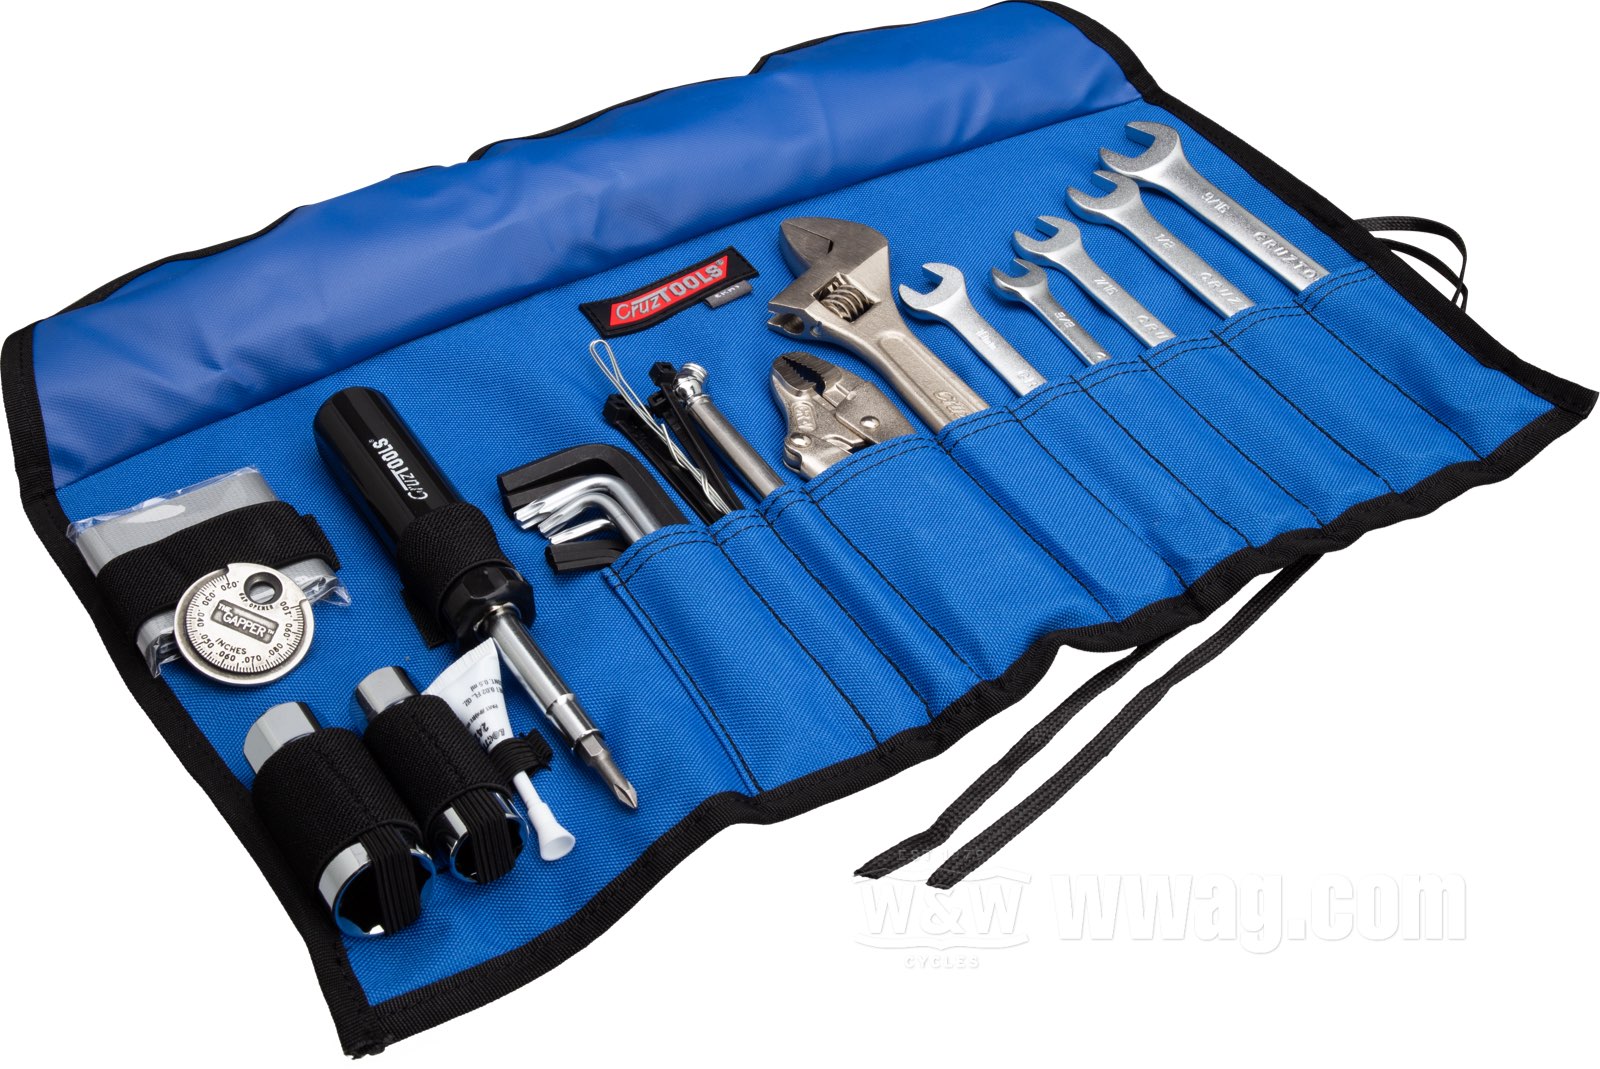 Trousse à outils Cruztools RoadTech H3 (Harley Davidson